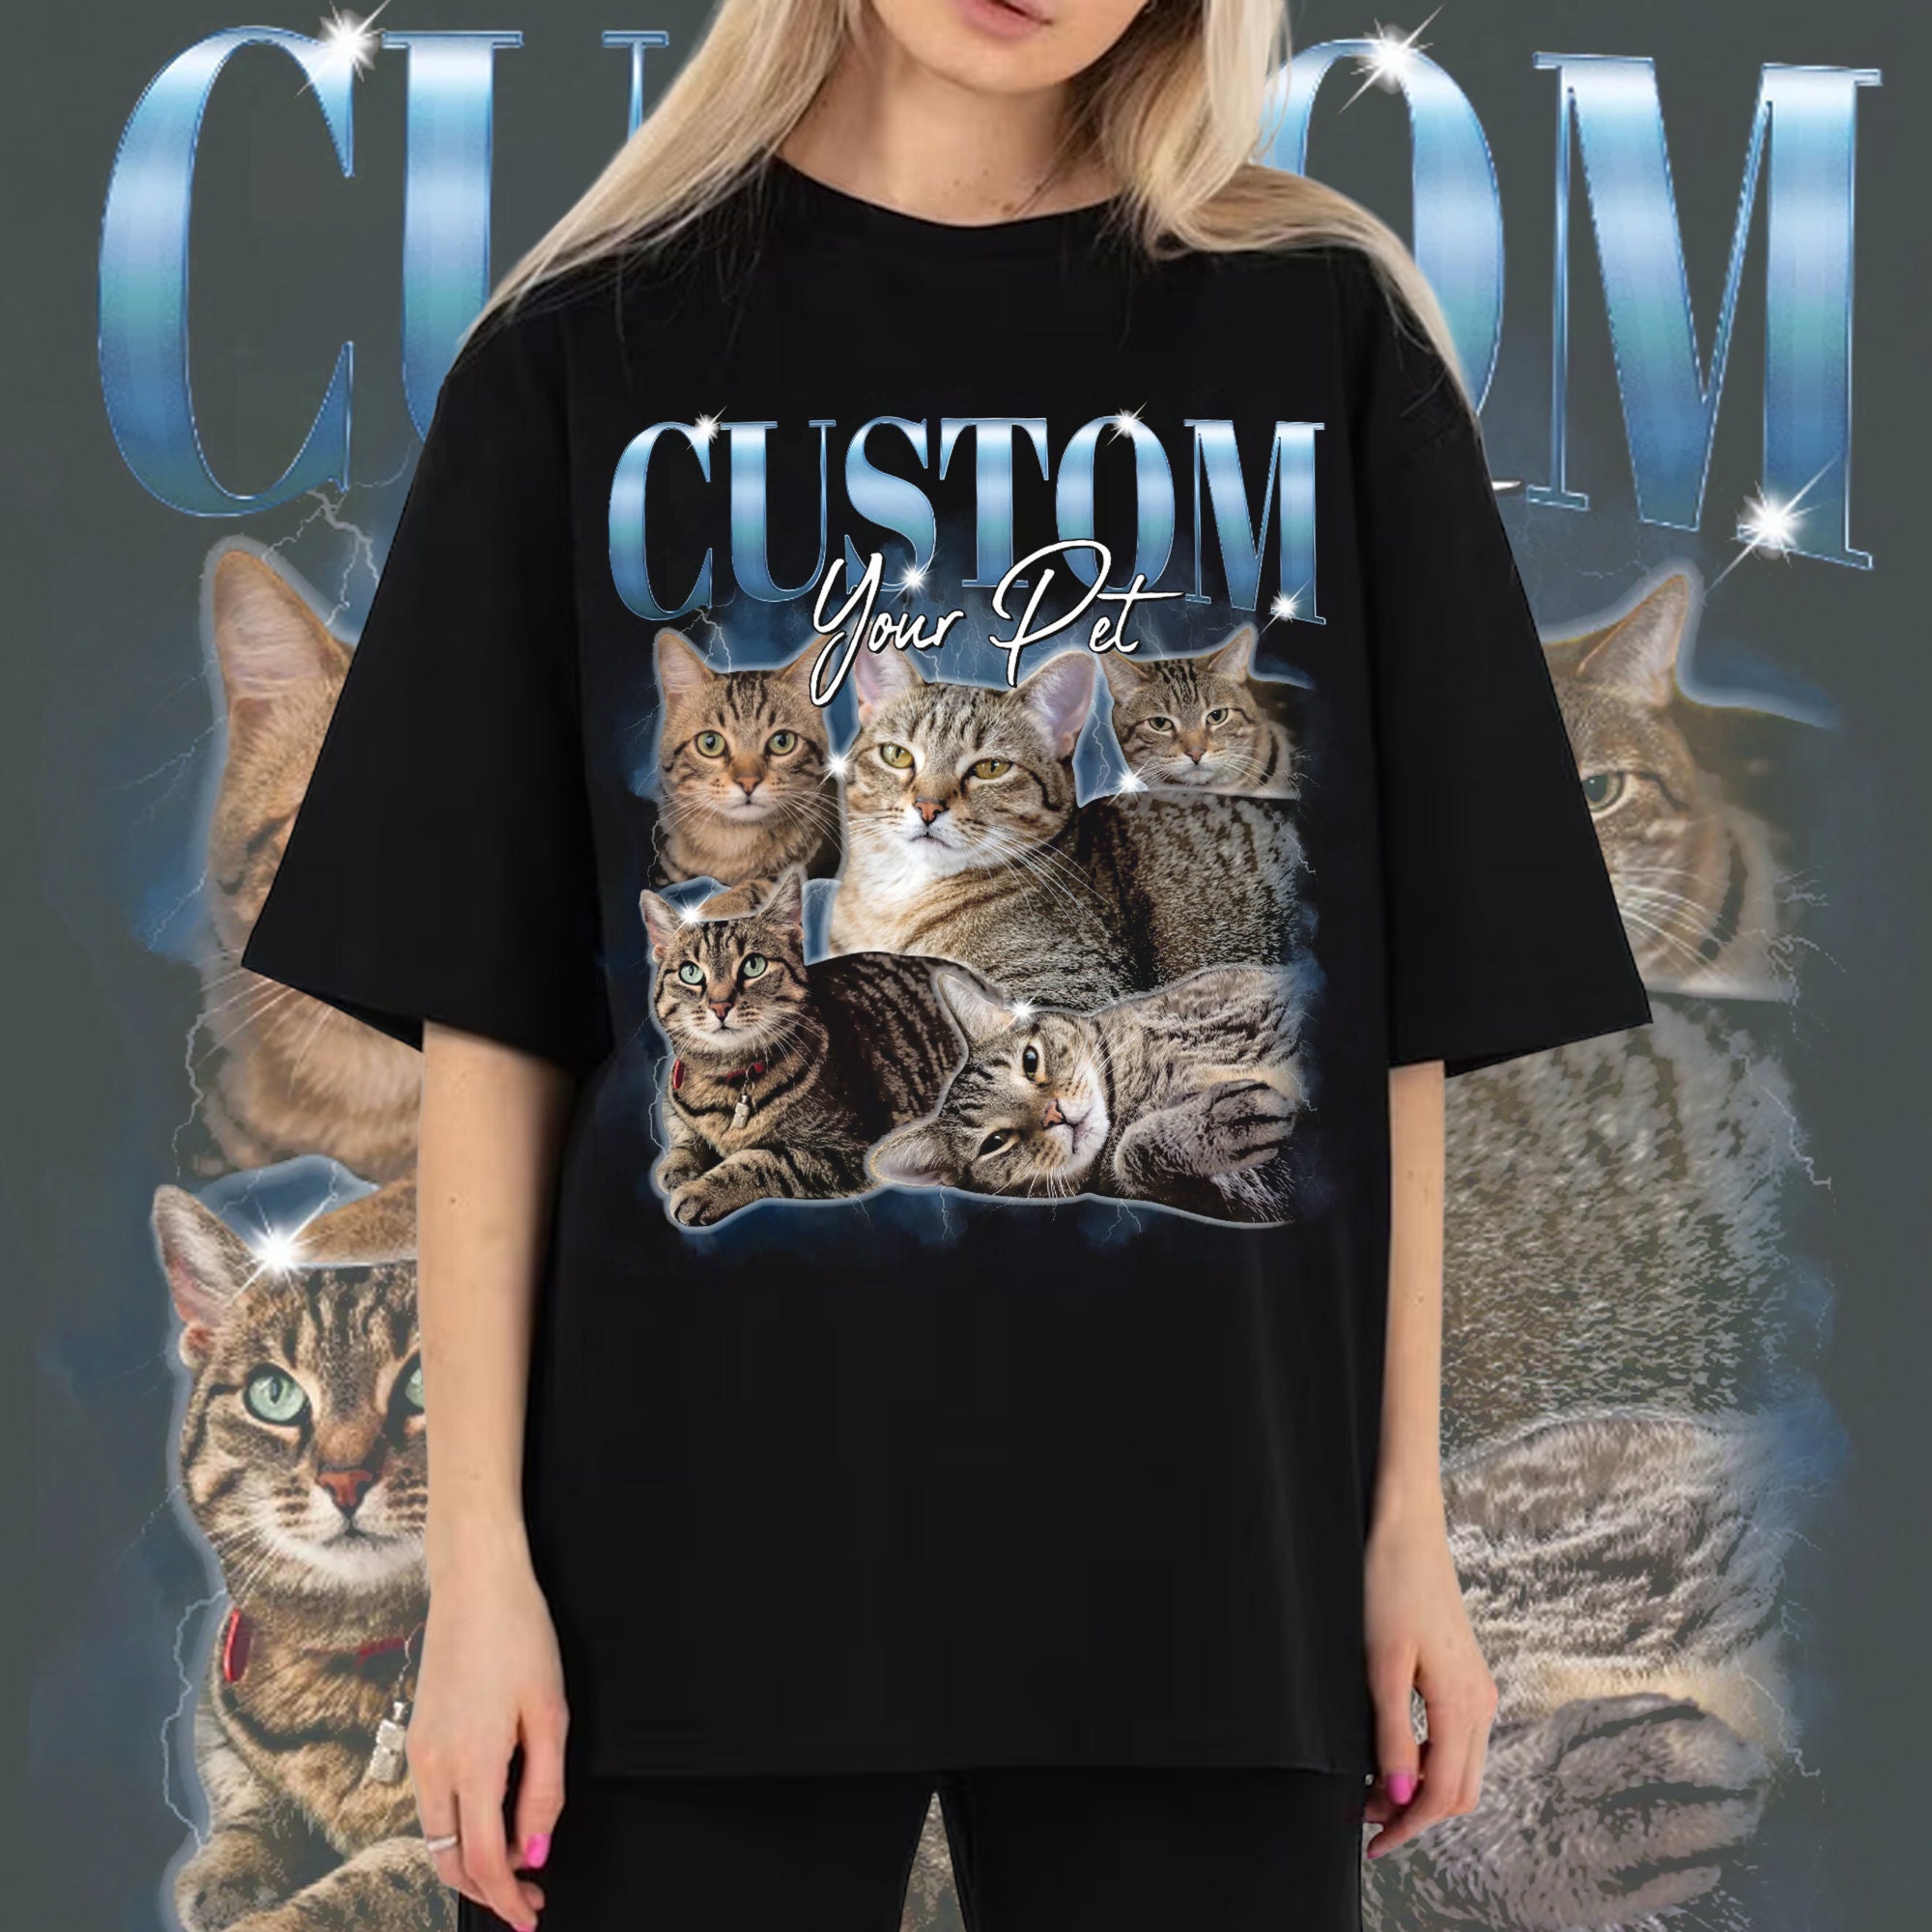 Discover Pet Custom Vintage Washed Shirt, Custom Cat Graphic Unisex T-Shirt, Dog Personalize Bootleg Retro 90's Tee Gift For Her, Pet Lover Shirt